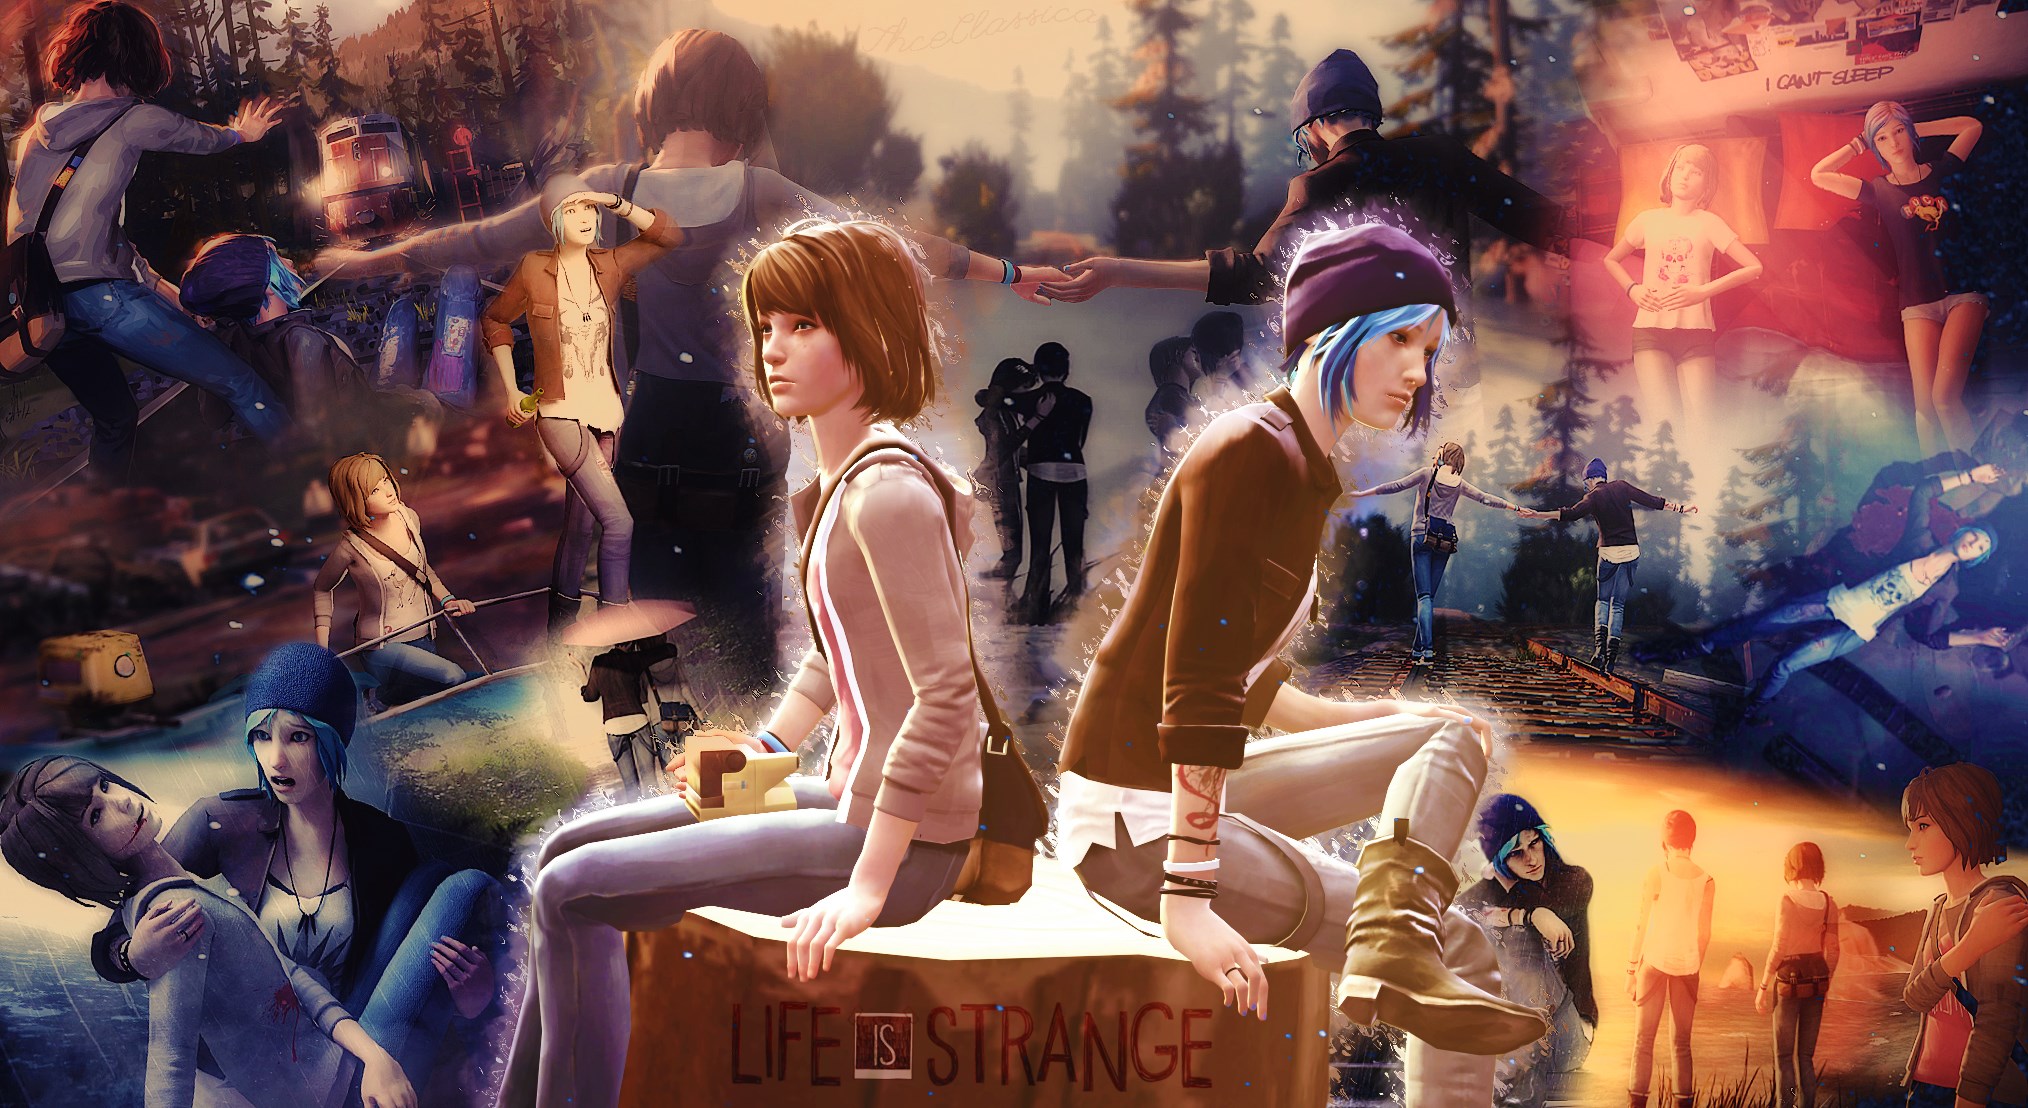 Life Is Strange Cover , HD Wallpaper & Backgrounds